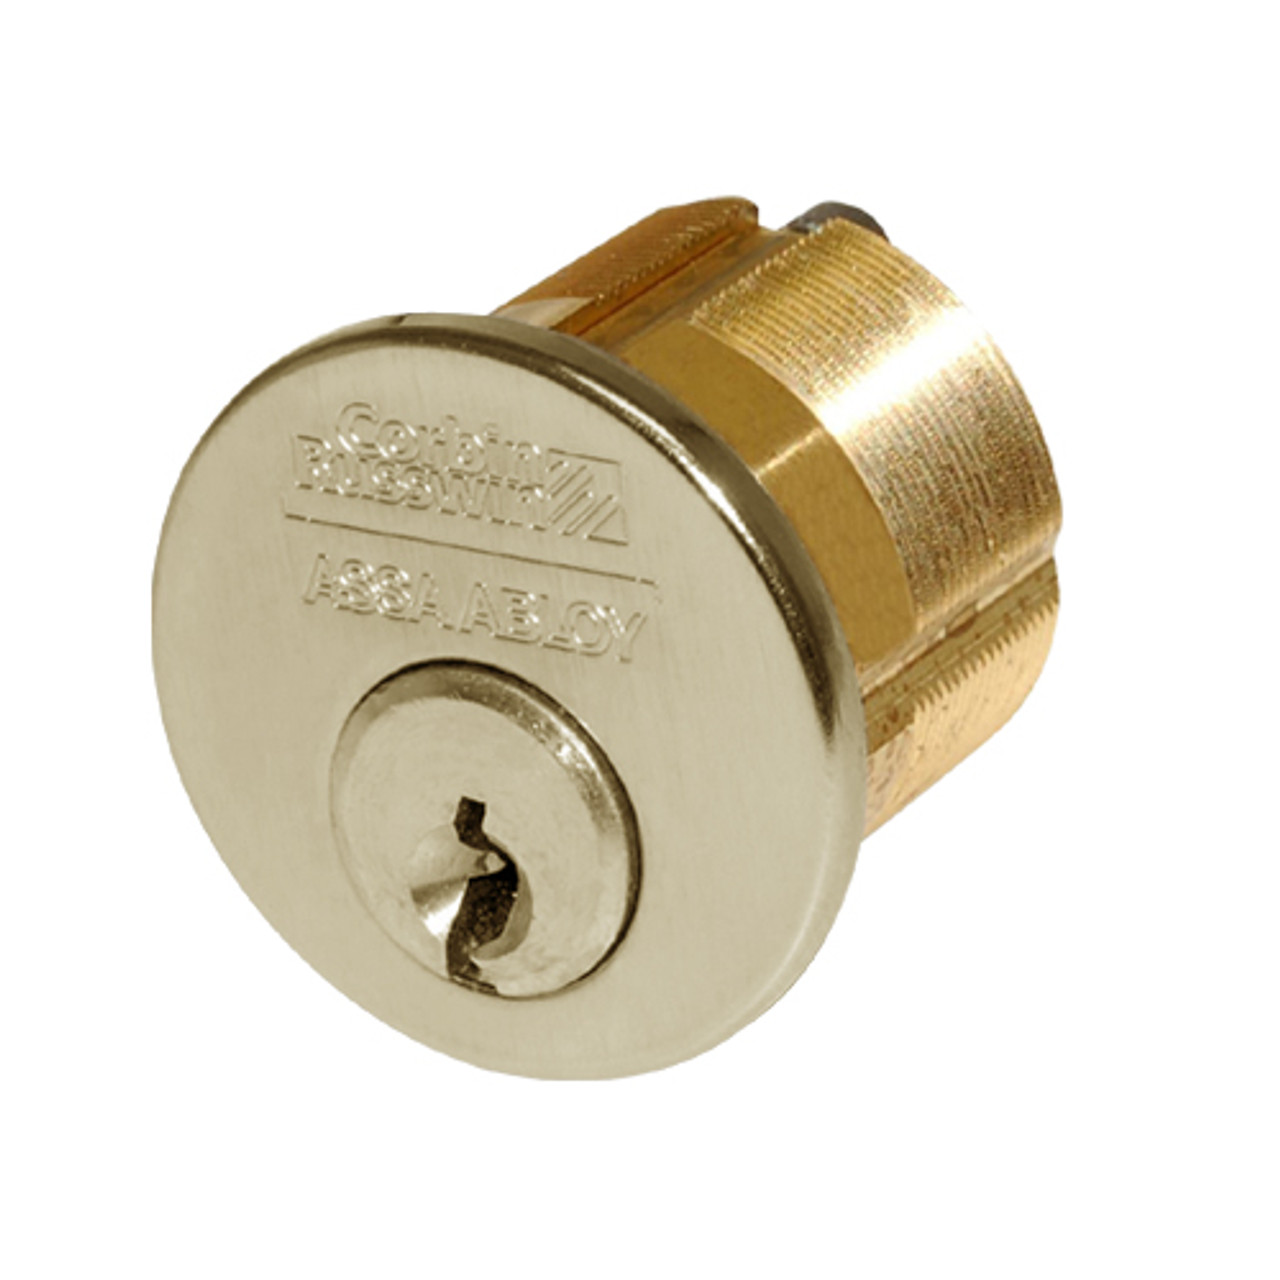 CR1000-138-A01-6-57B1-606 Corbin Conventional Mortise Cylinder for Mortise Lock and DL3000 Deadlocks with Cloverleaf Cam in Satin Brass Finish